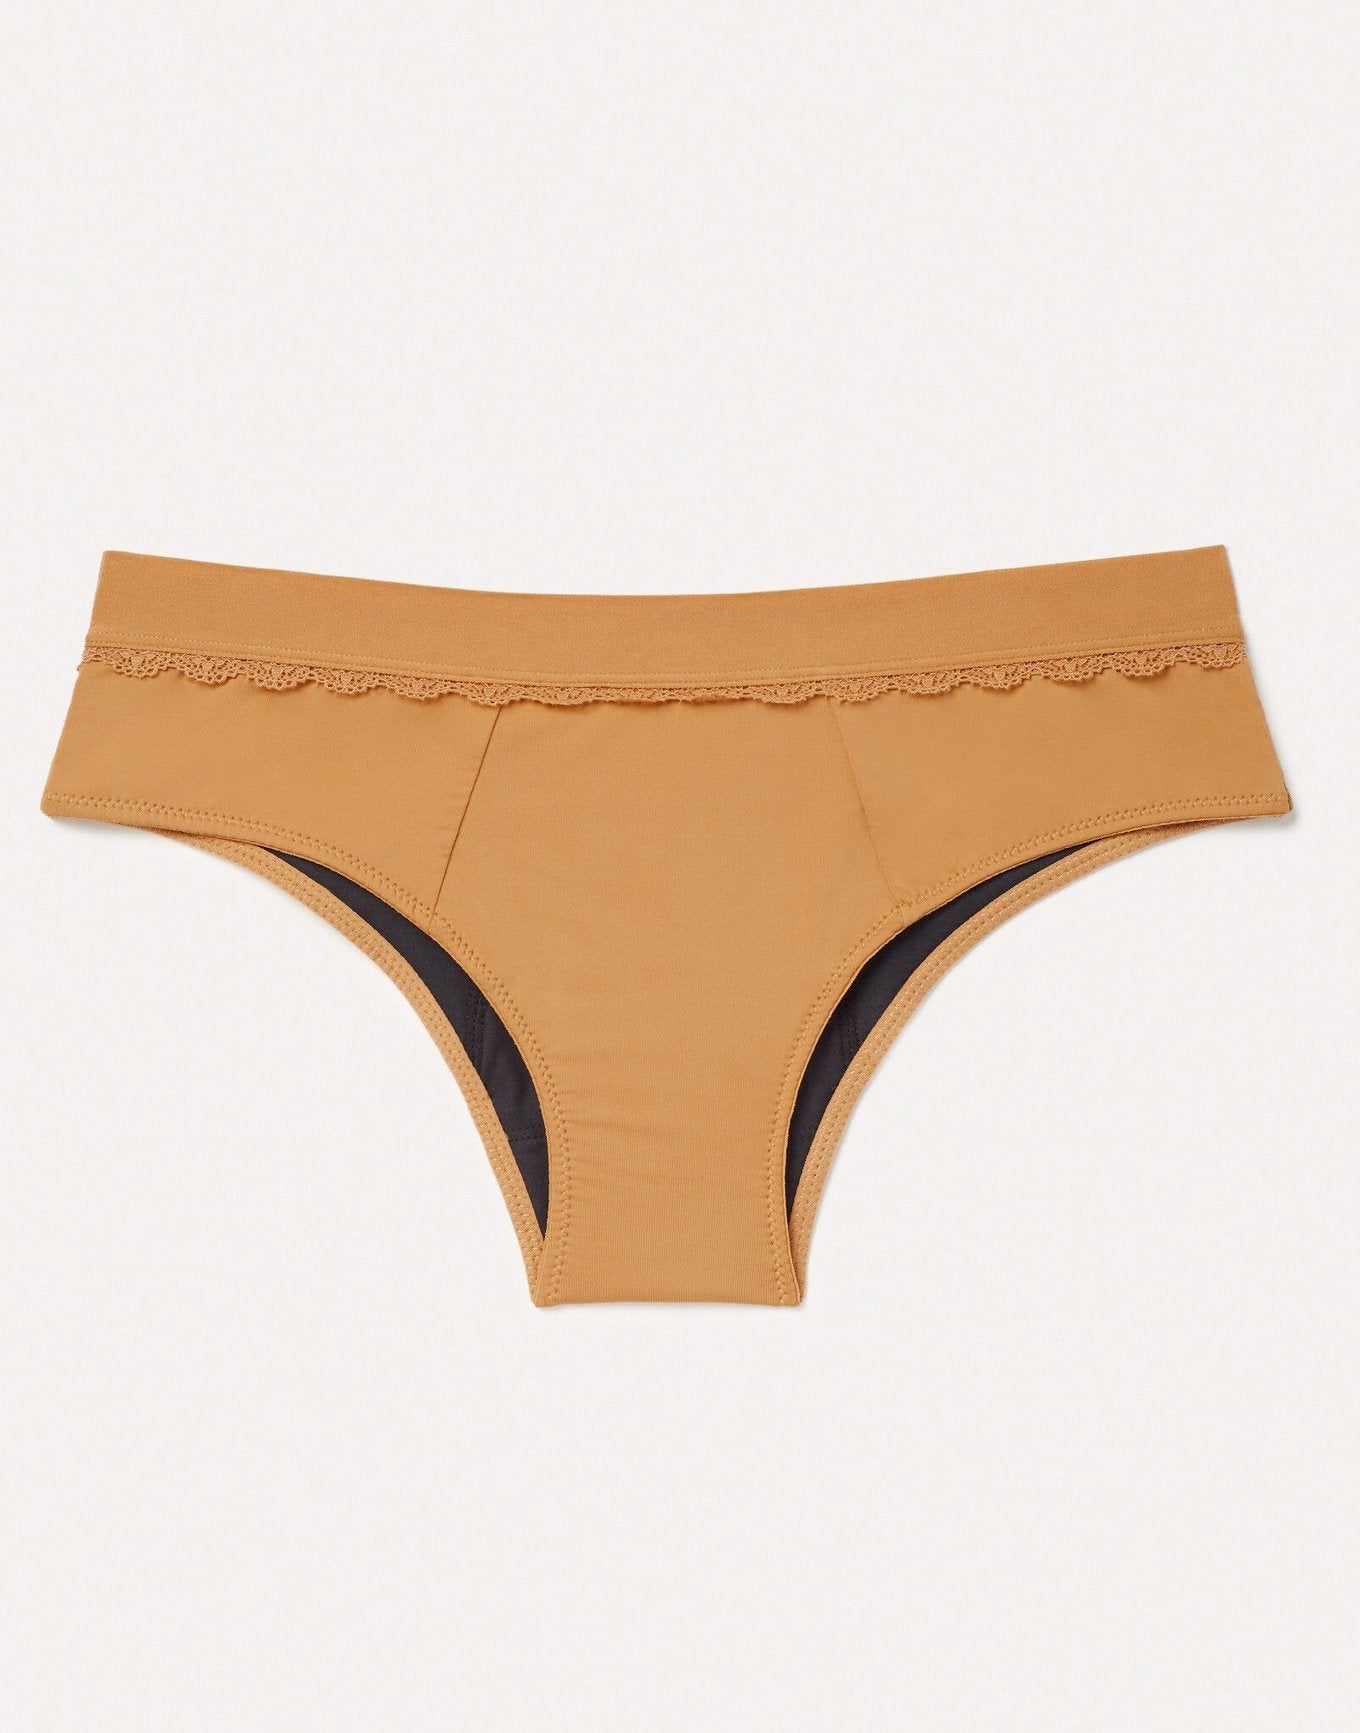 Joyja Cindy period-proof panty in color Sand Dry and shape cheeky